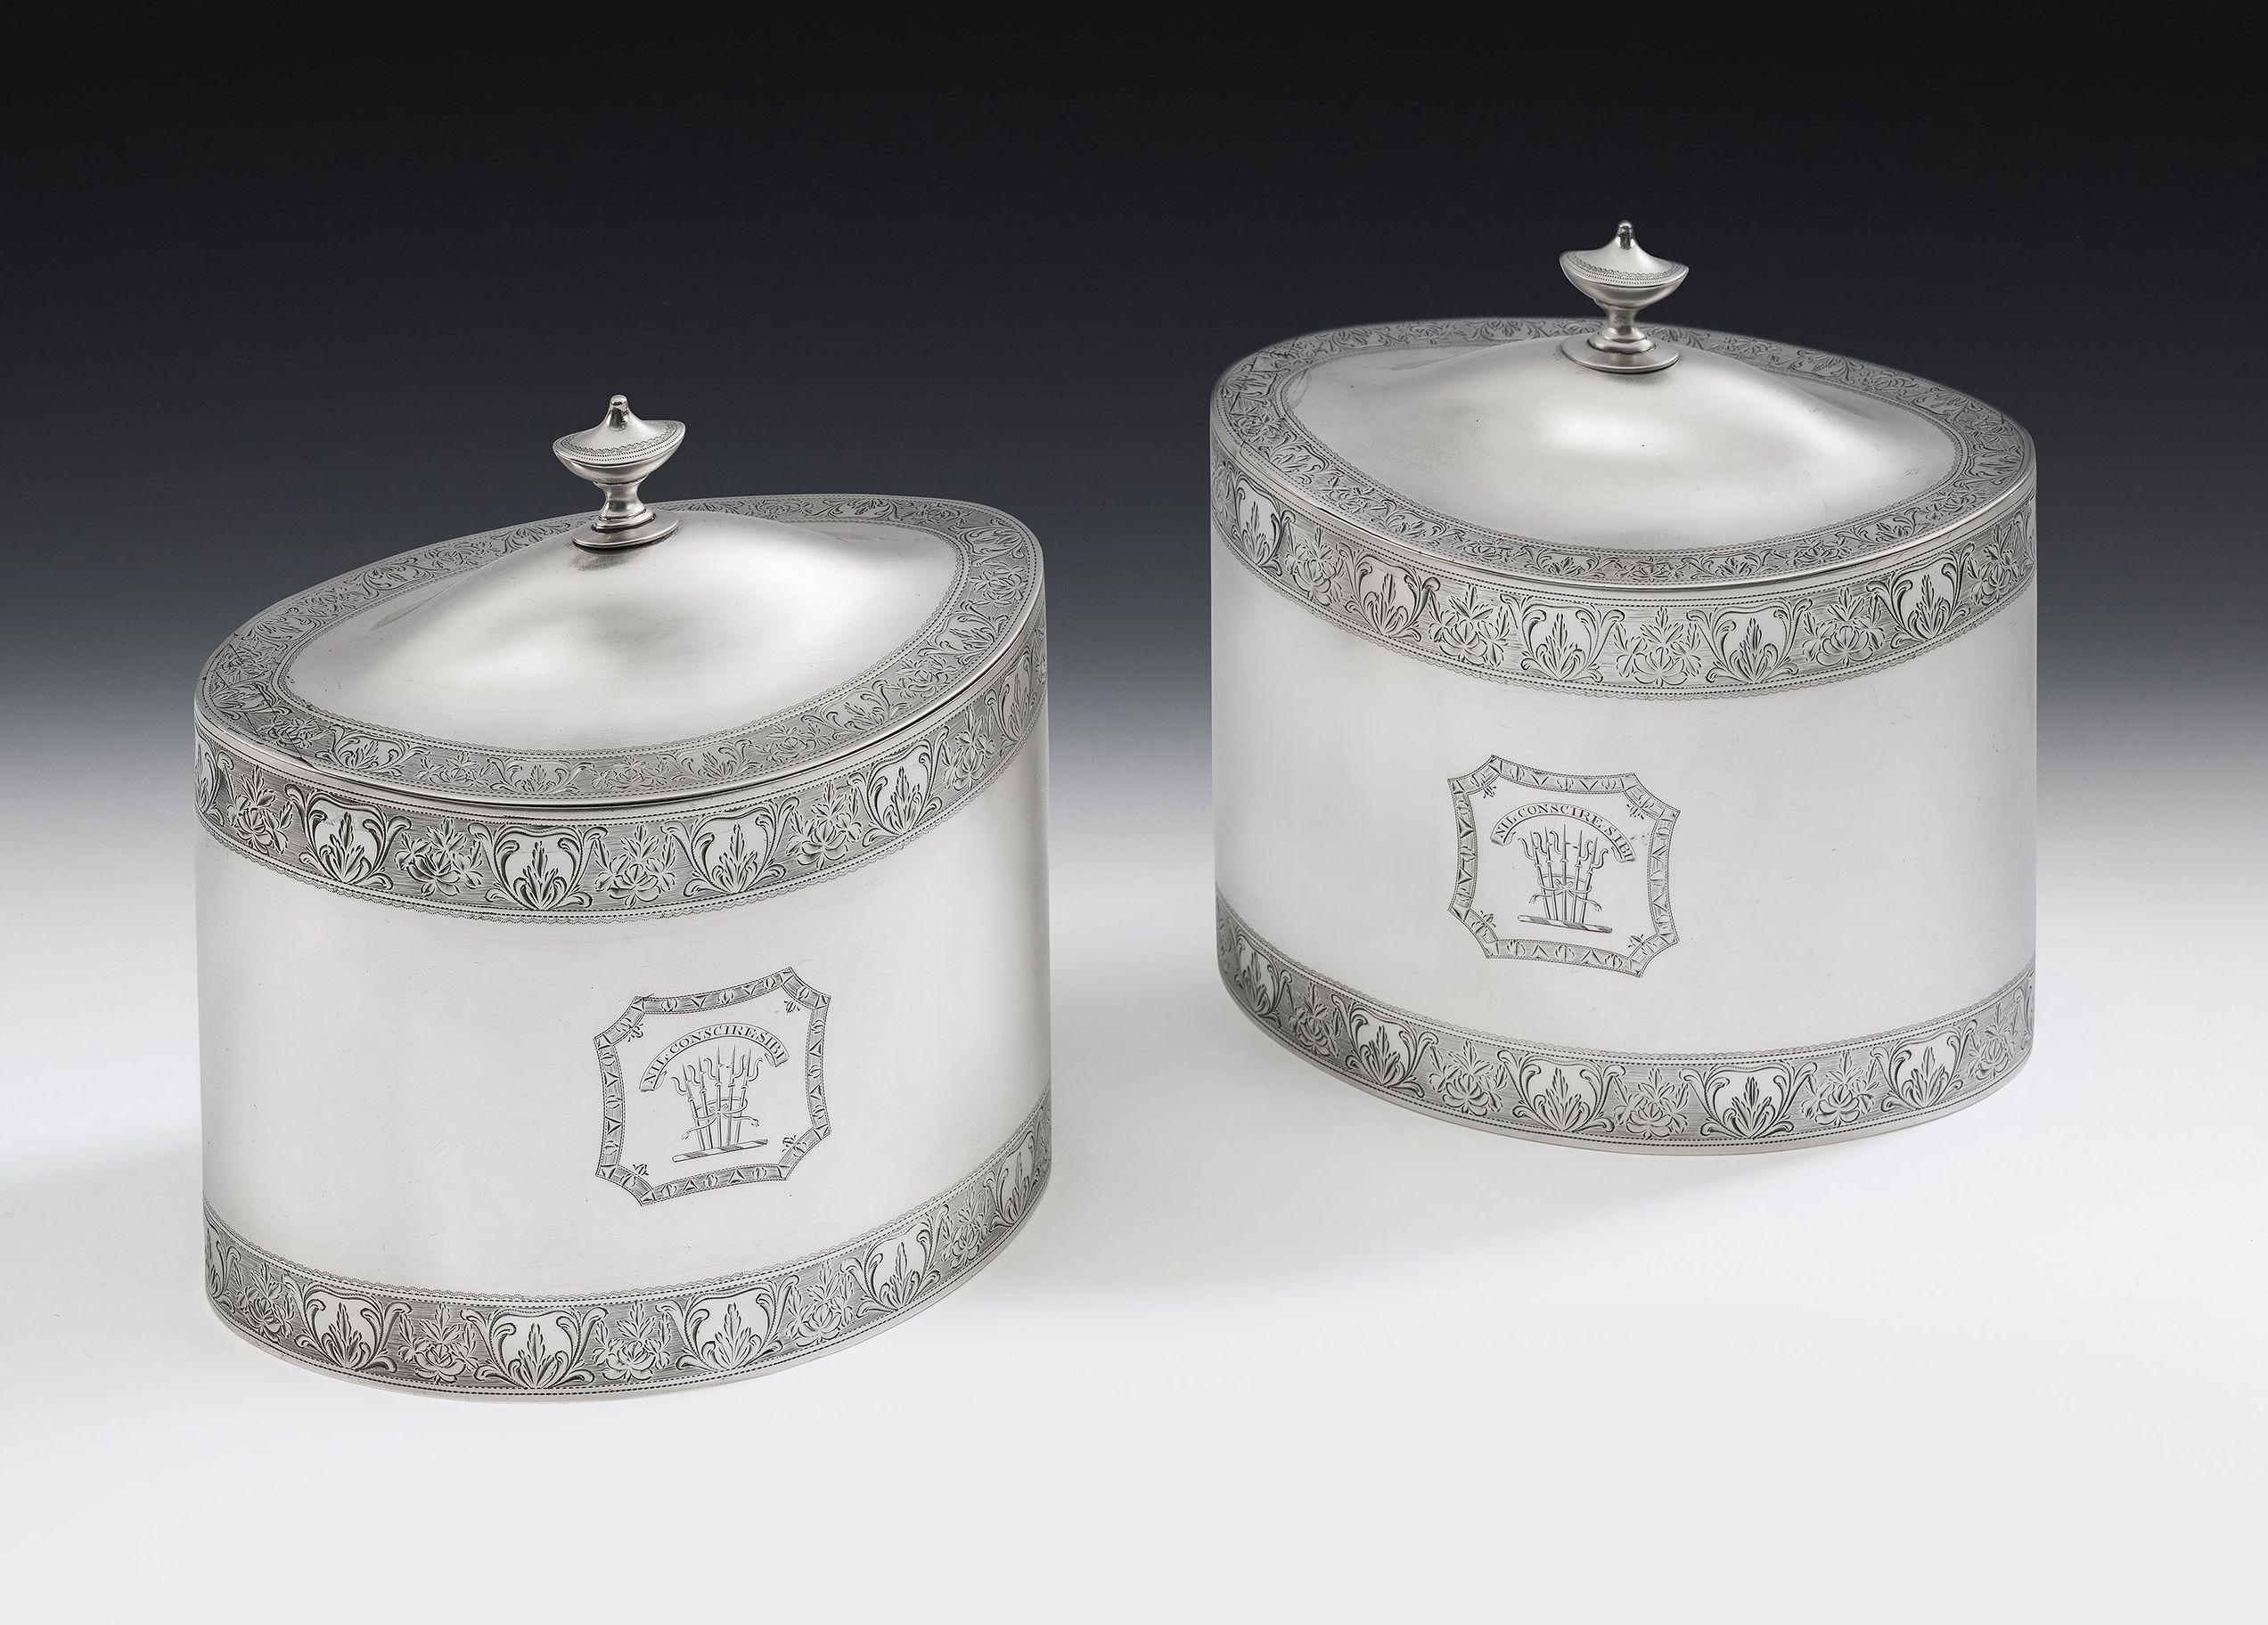 The Faulkbourne hall cased tea caddies. An important and very unusual pair of George III tea caddies made in London in 1793 by William Frisbee, all contained within a contemporary velvet and silk lined satinwood case. The hinges and handle also